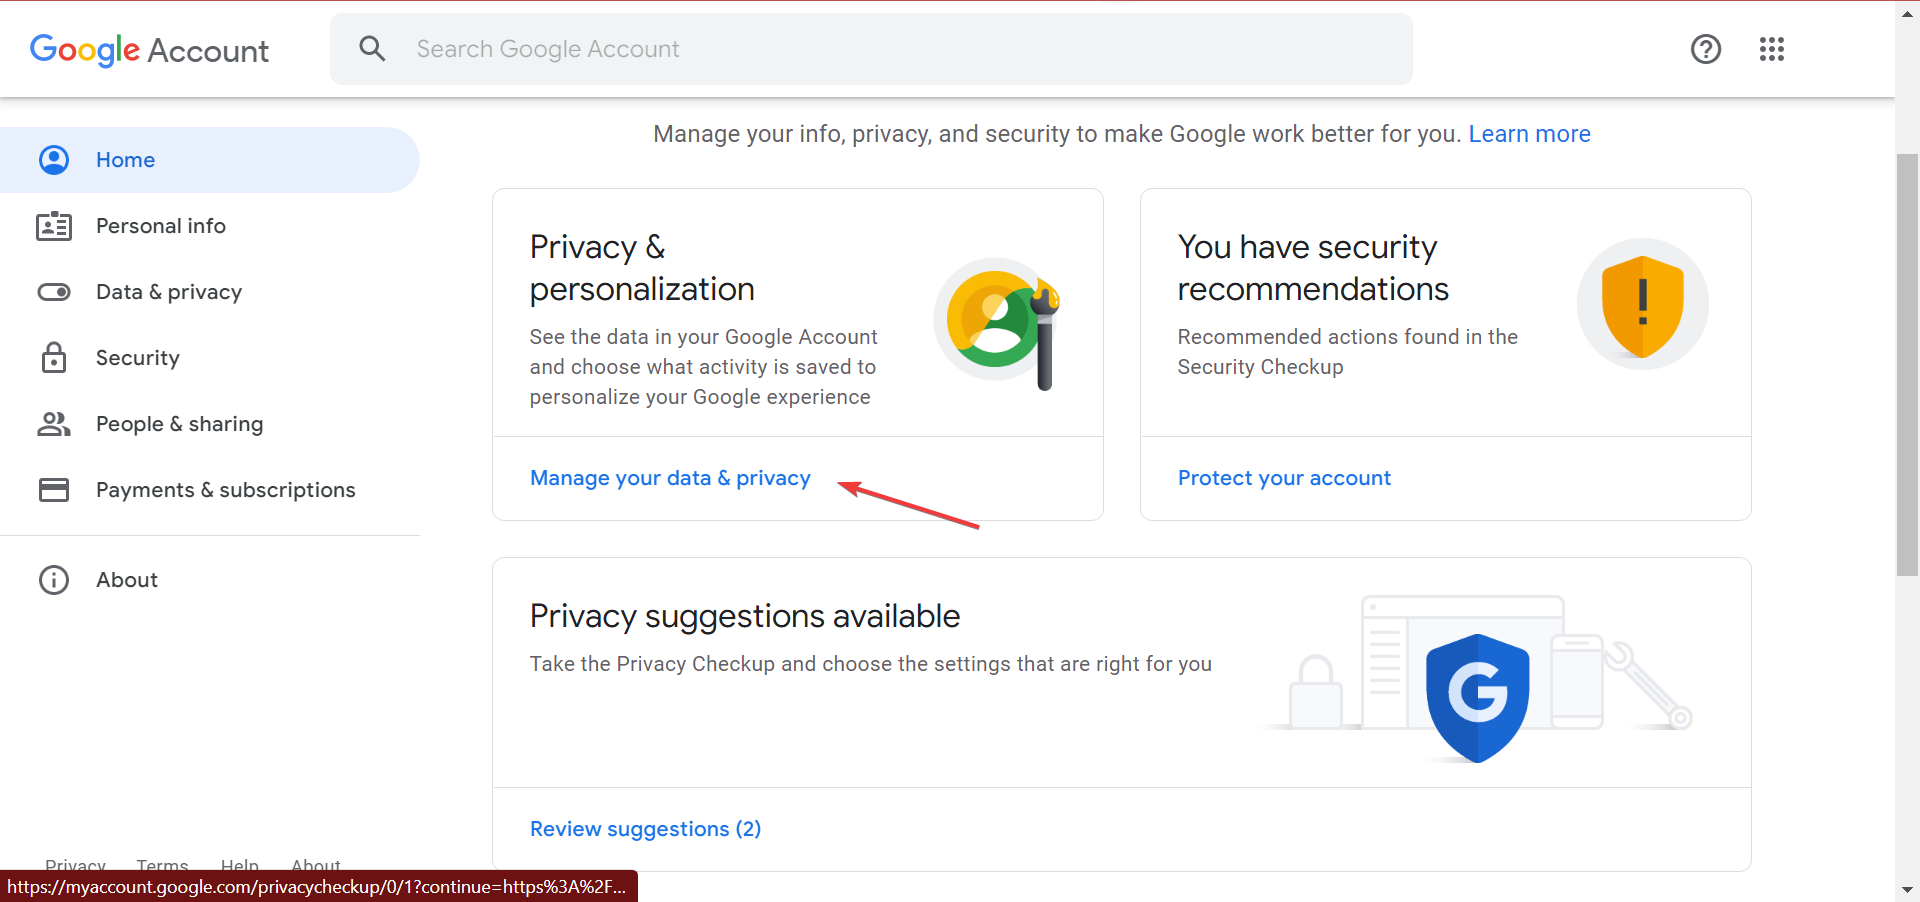 manage your data & privacy to search all chrome history